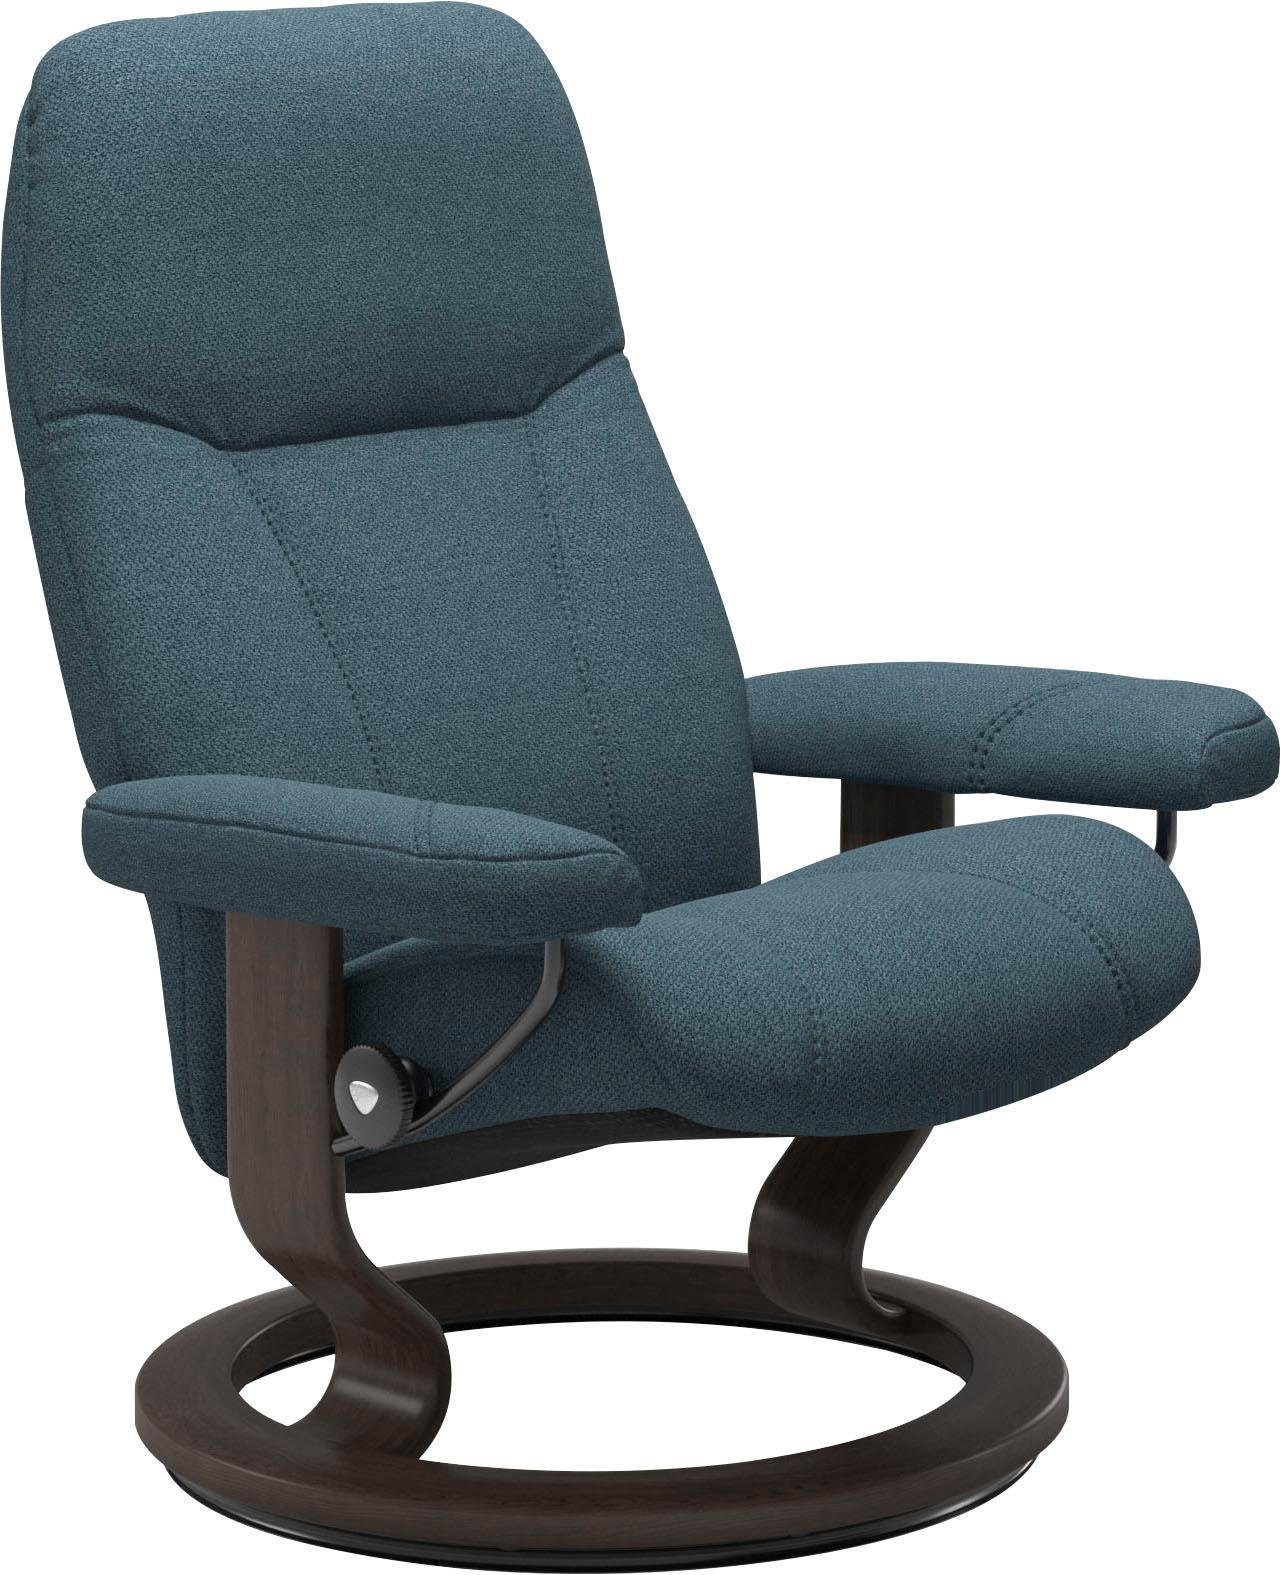 Stressless® Relaxsessel Consul, mit Wenge Base, Größe S, Classic Gestell